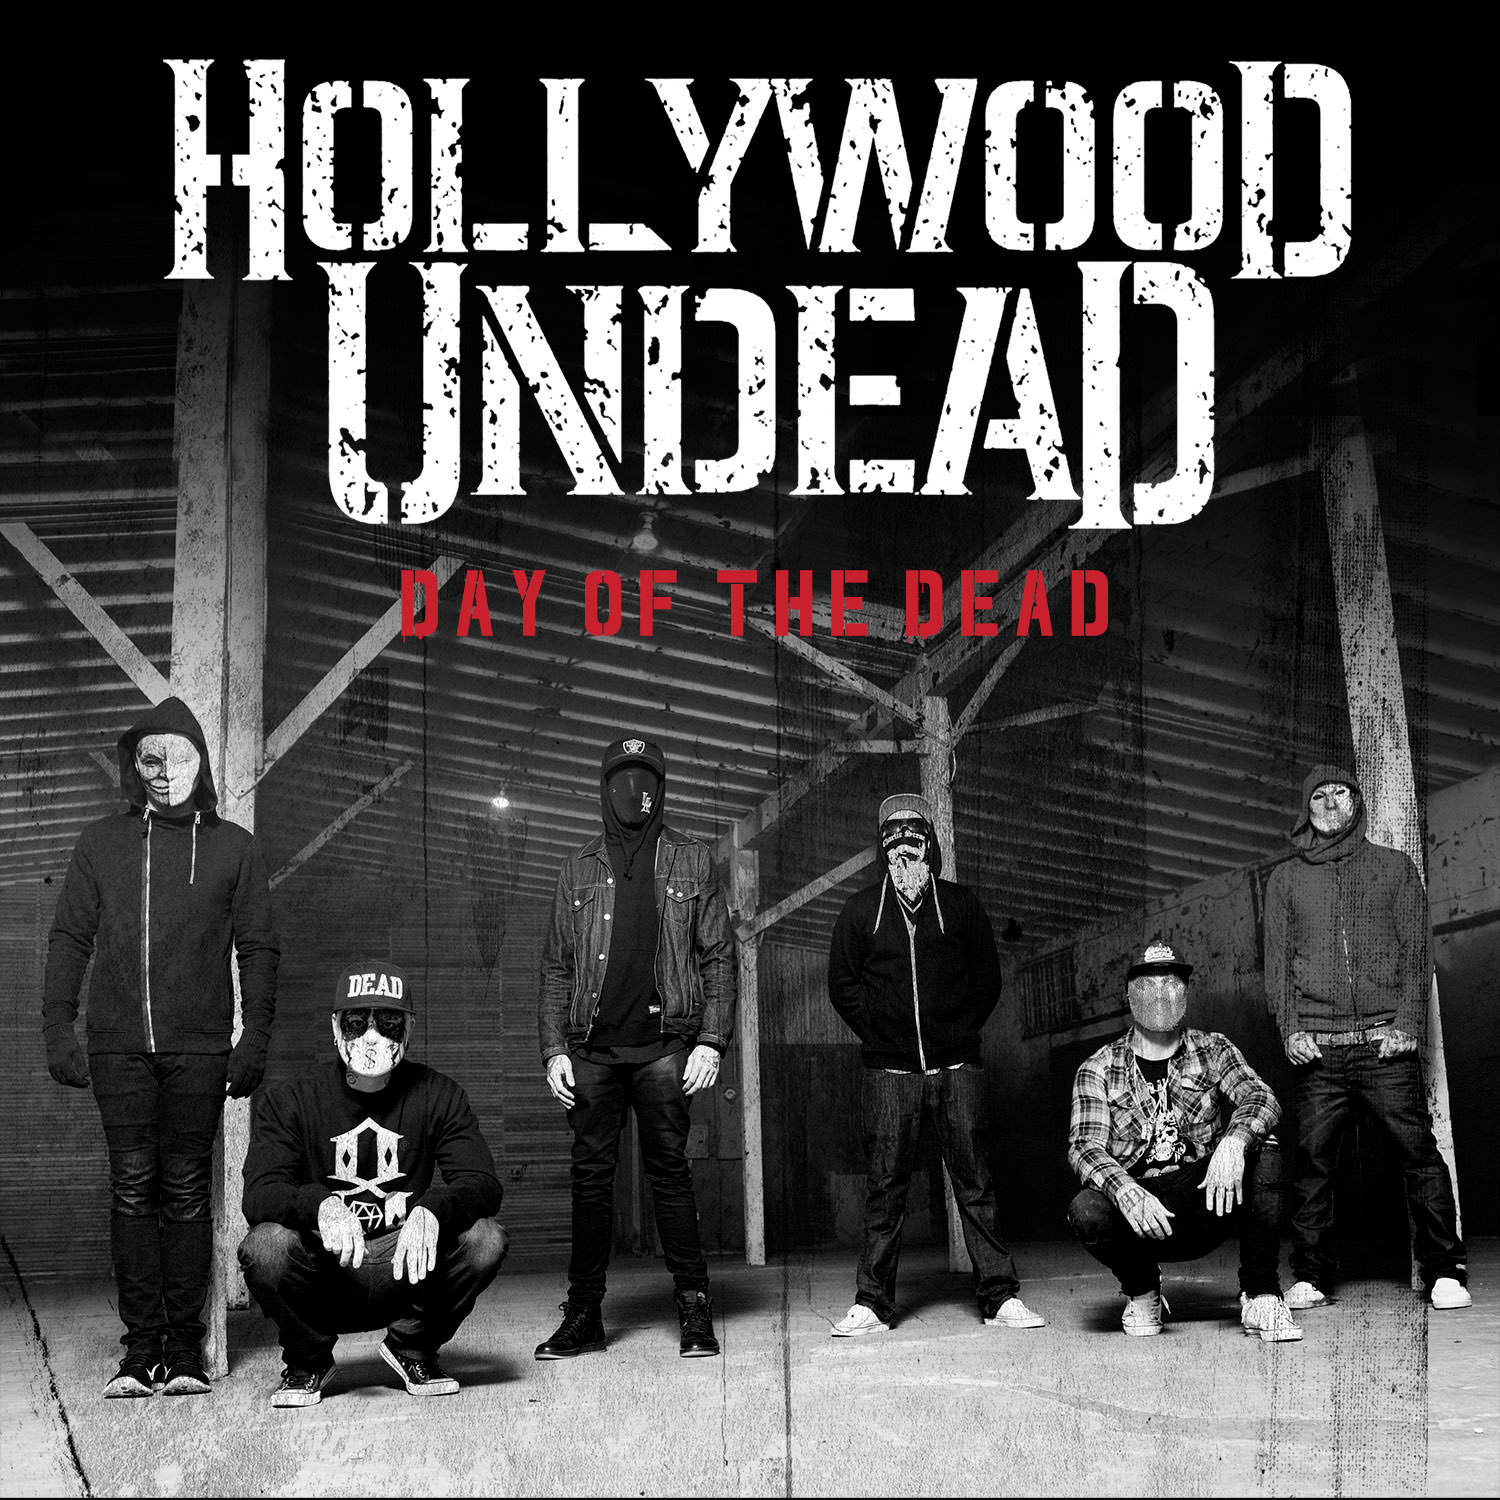 Hollywood Undead – Day Of The Dead {Deluxe Edition} (2015/2017) [HDTracks FLAC 24bit/48kHz]